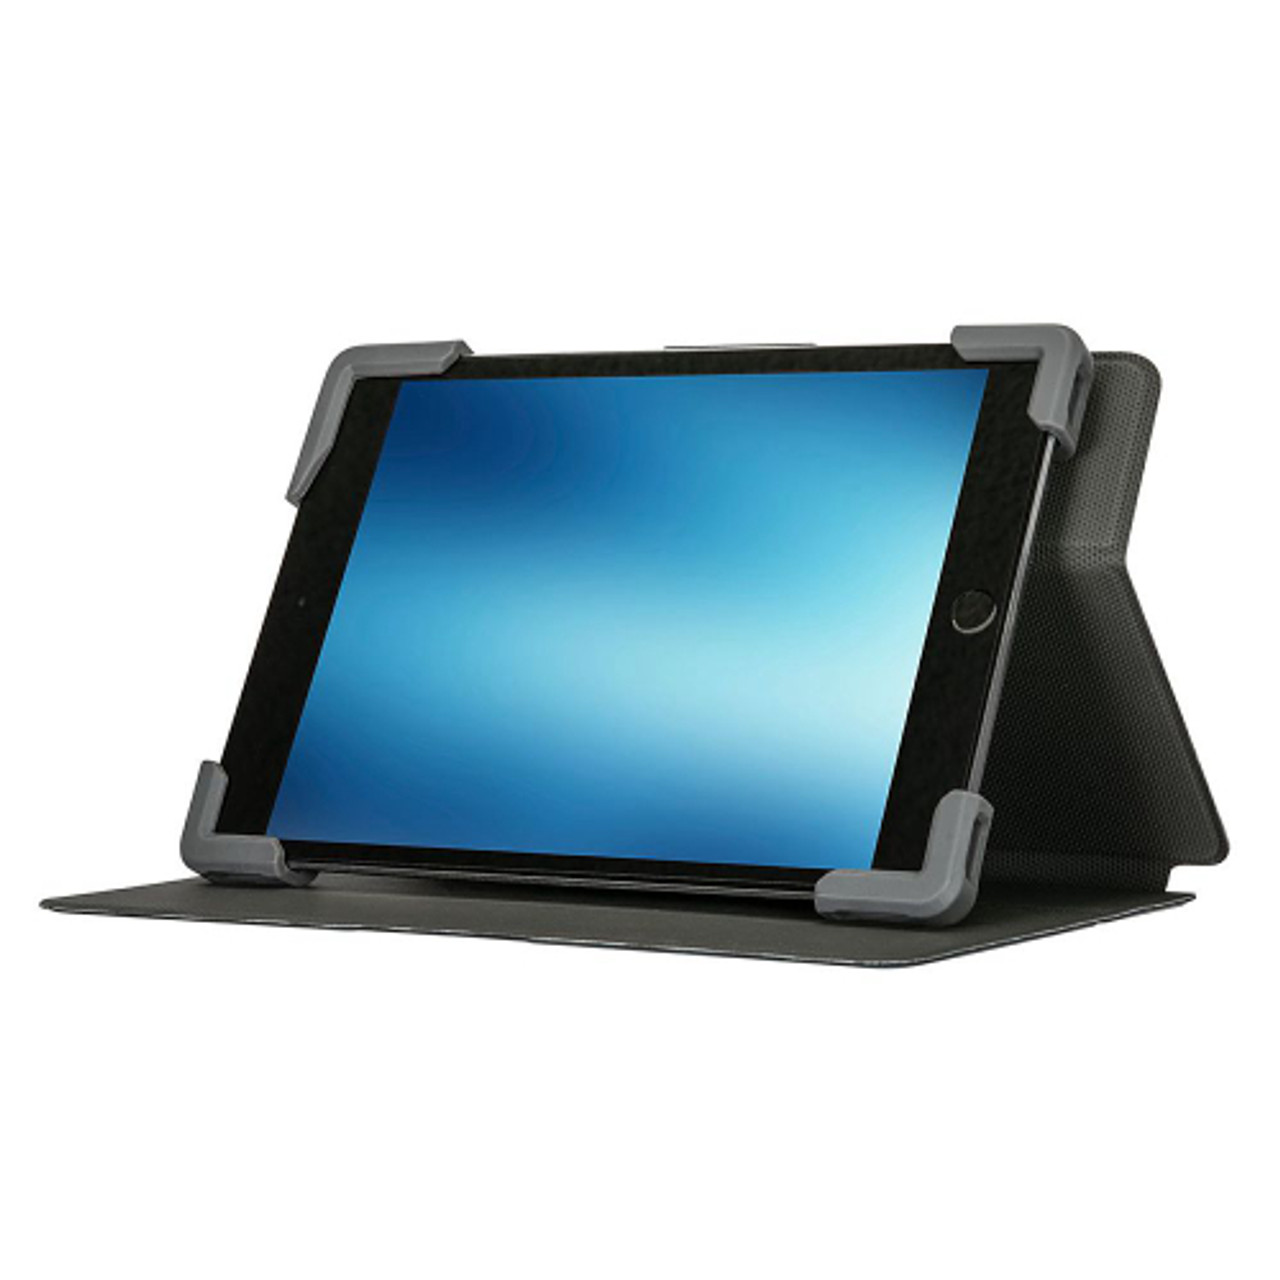 Targus - Safe Fit™ Universal 7-8.5” 360o Rotating Tablet Case - China Blue